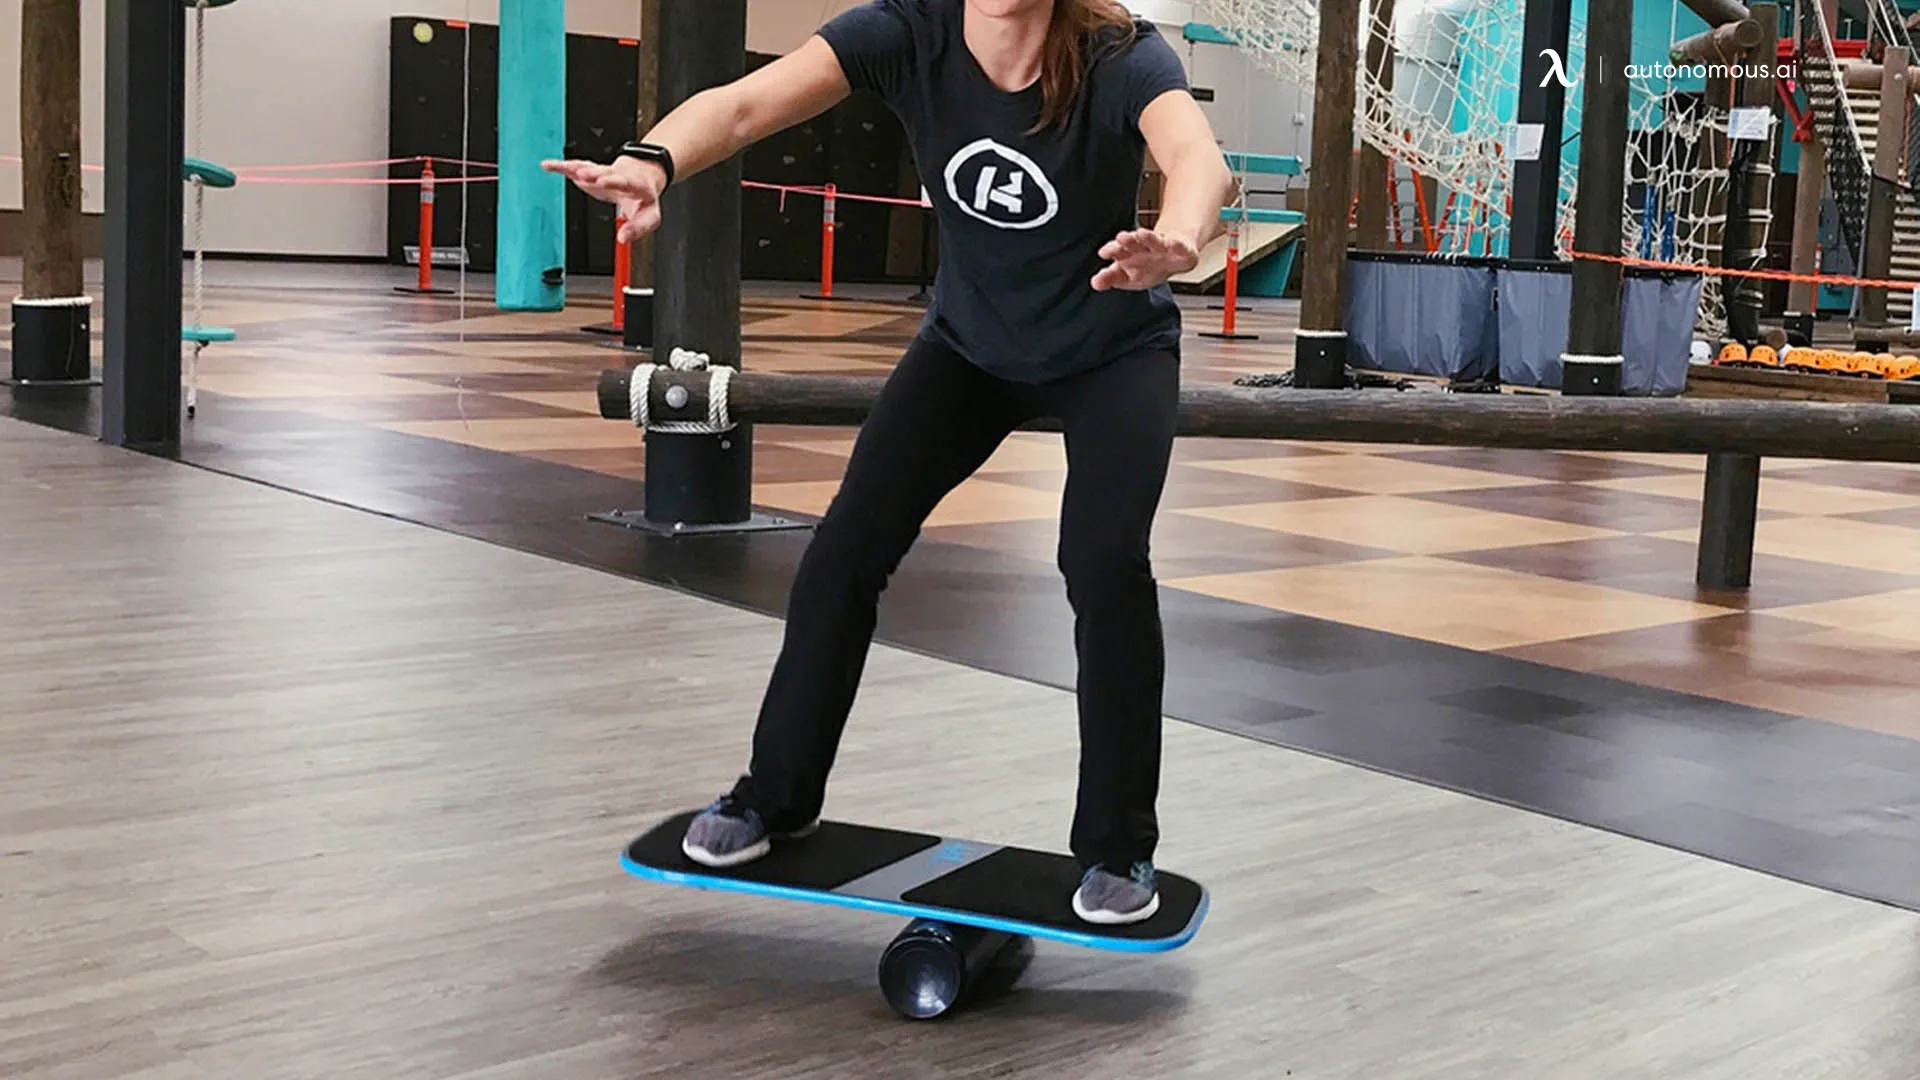 What Exactly Is a Balance Board?